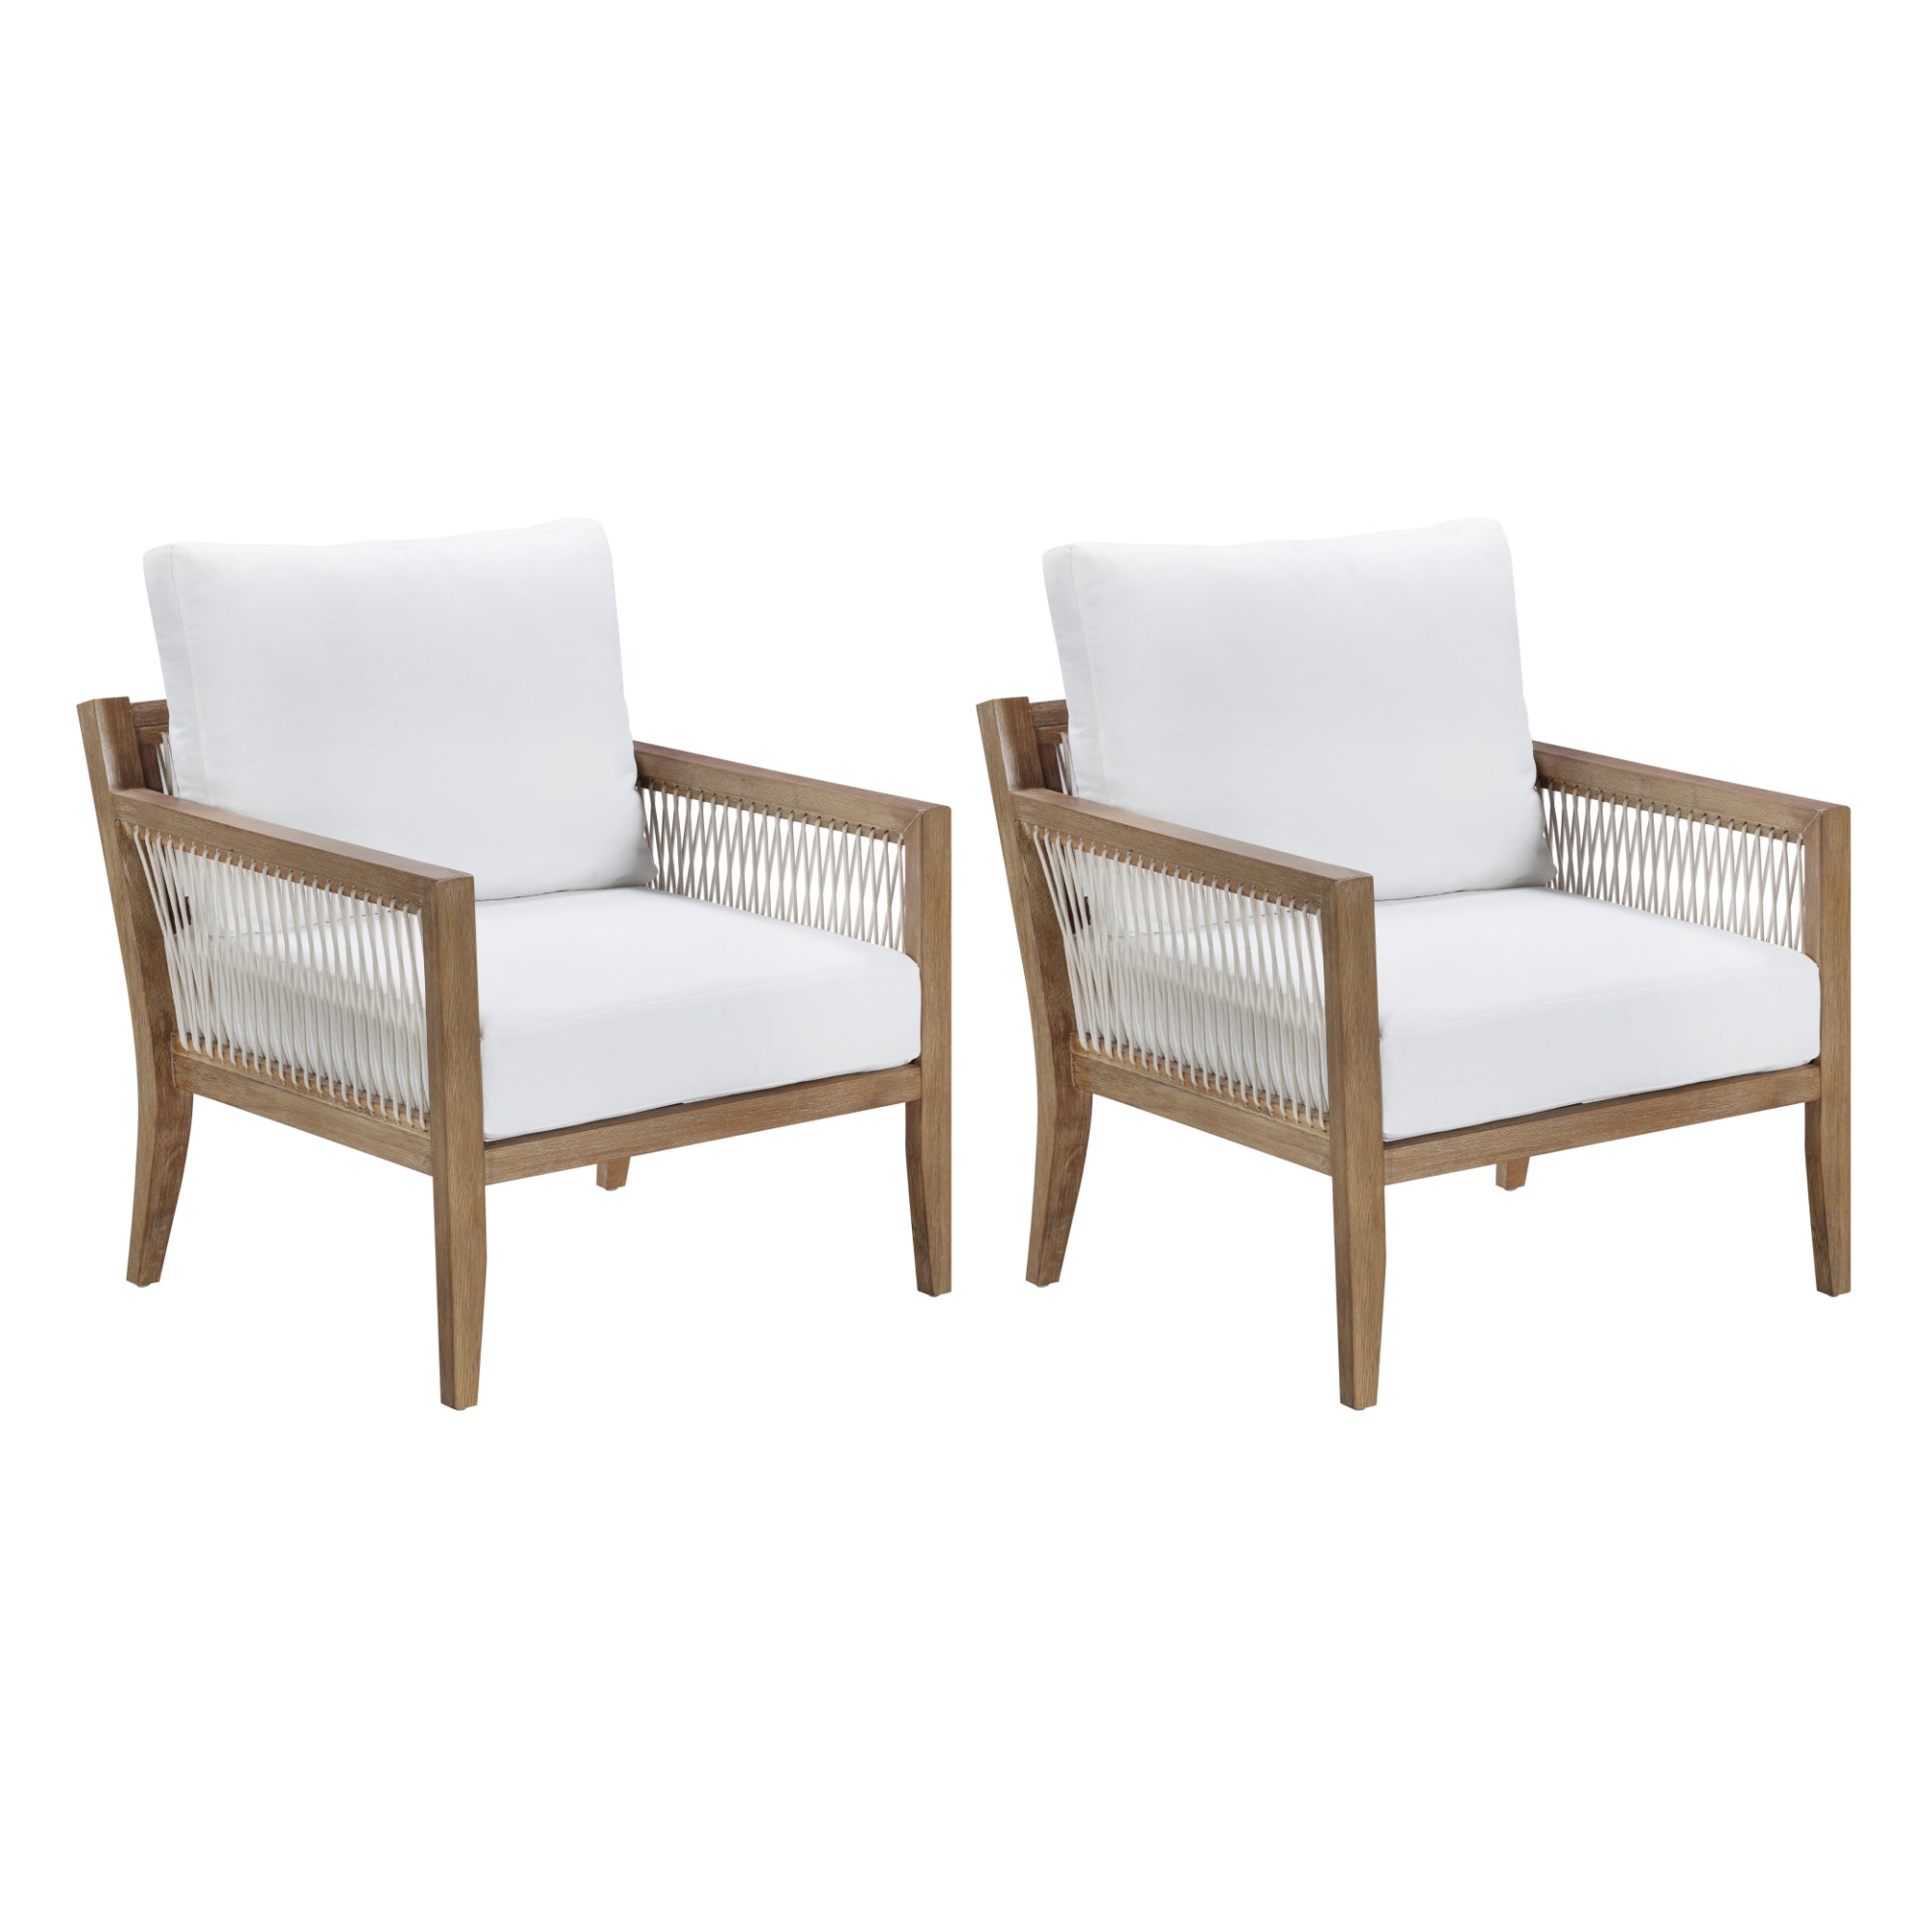 Set of 2 Outdoor Patio Arm Chairs White